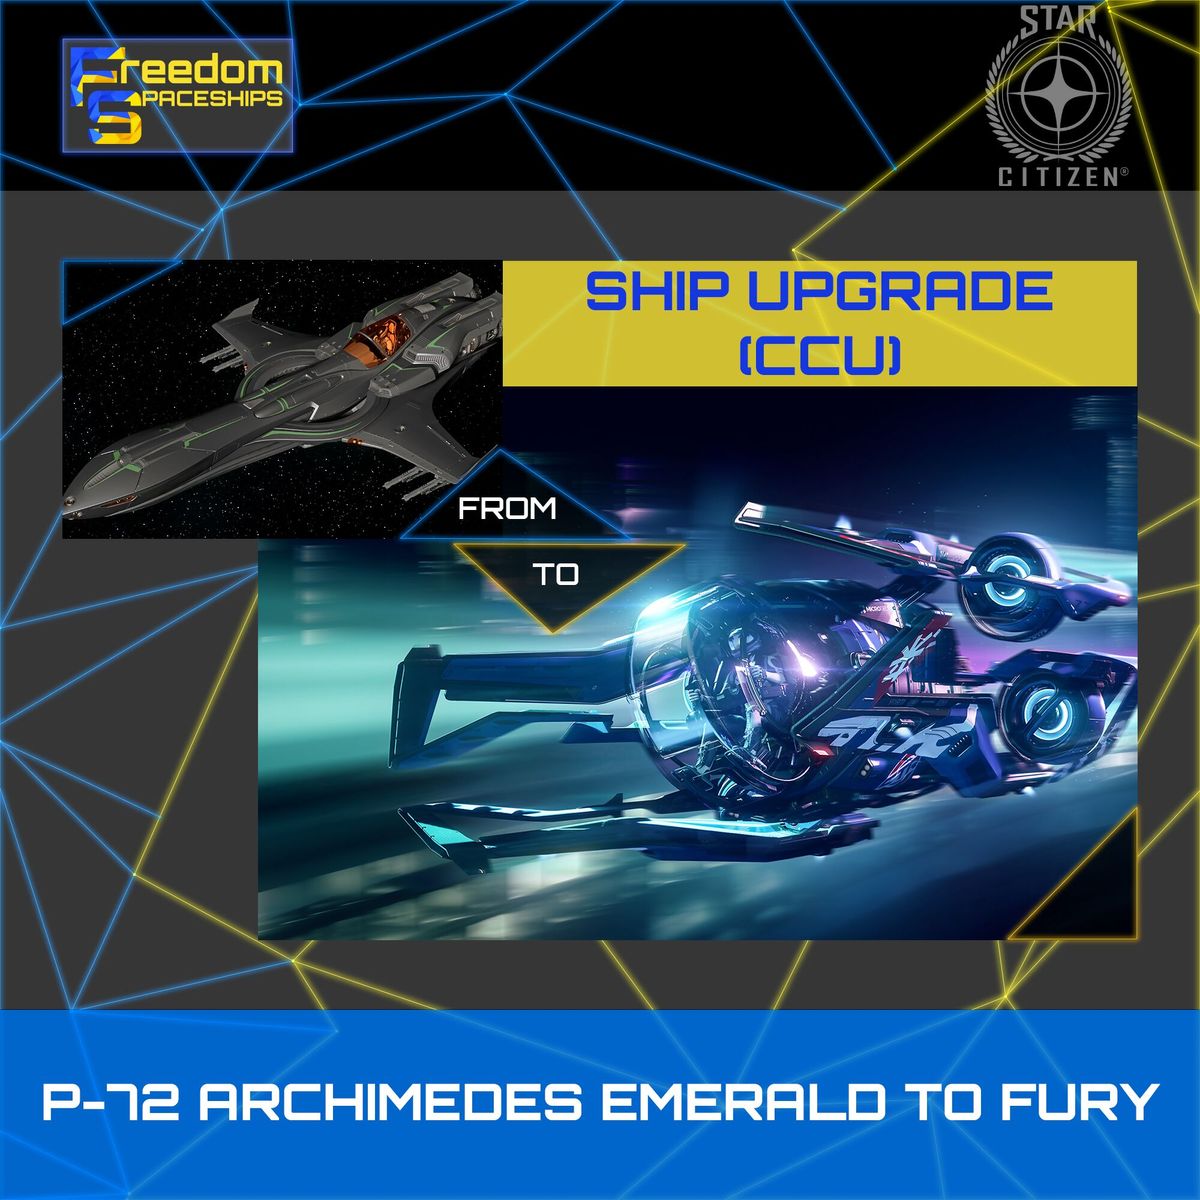 Upgrade - P-72 Archimedes Emerald to Fury LX